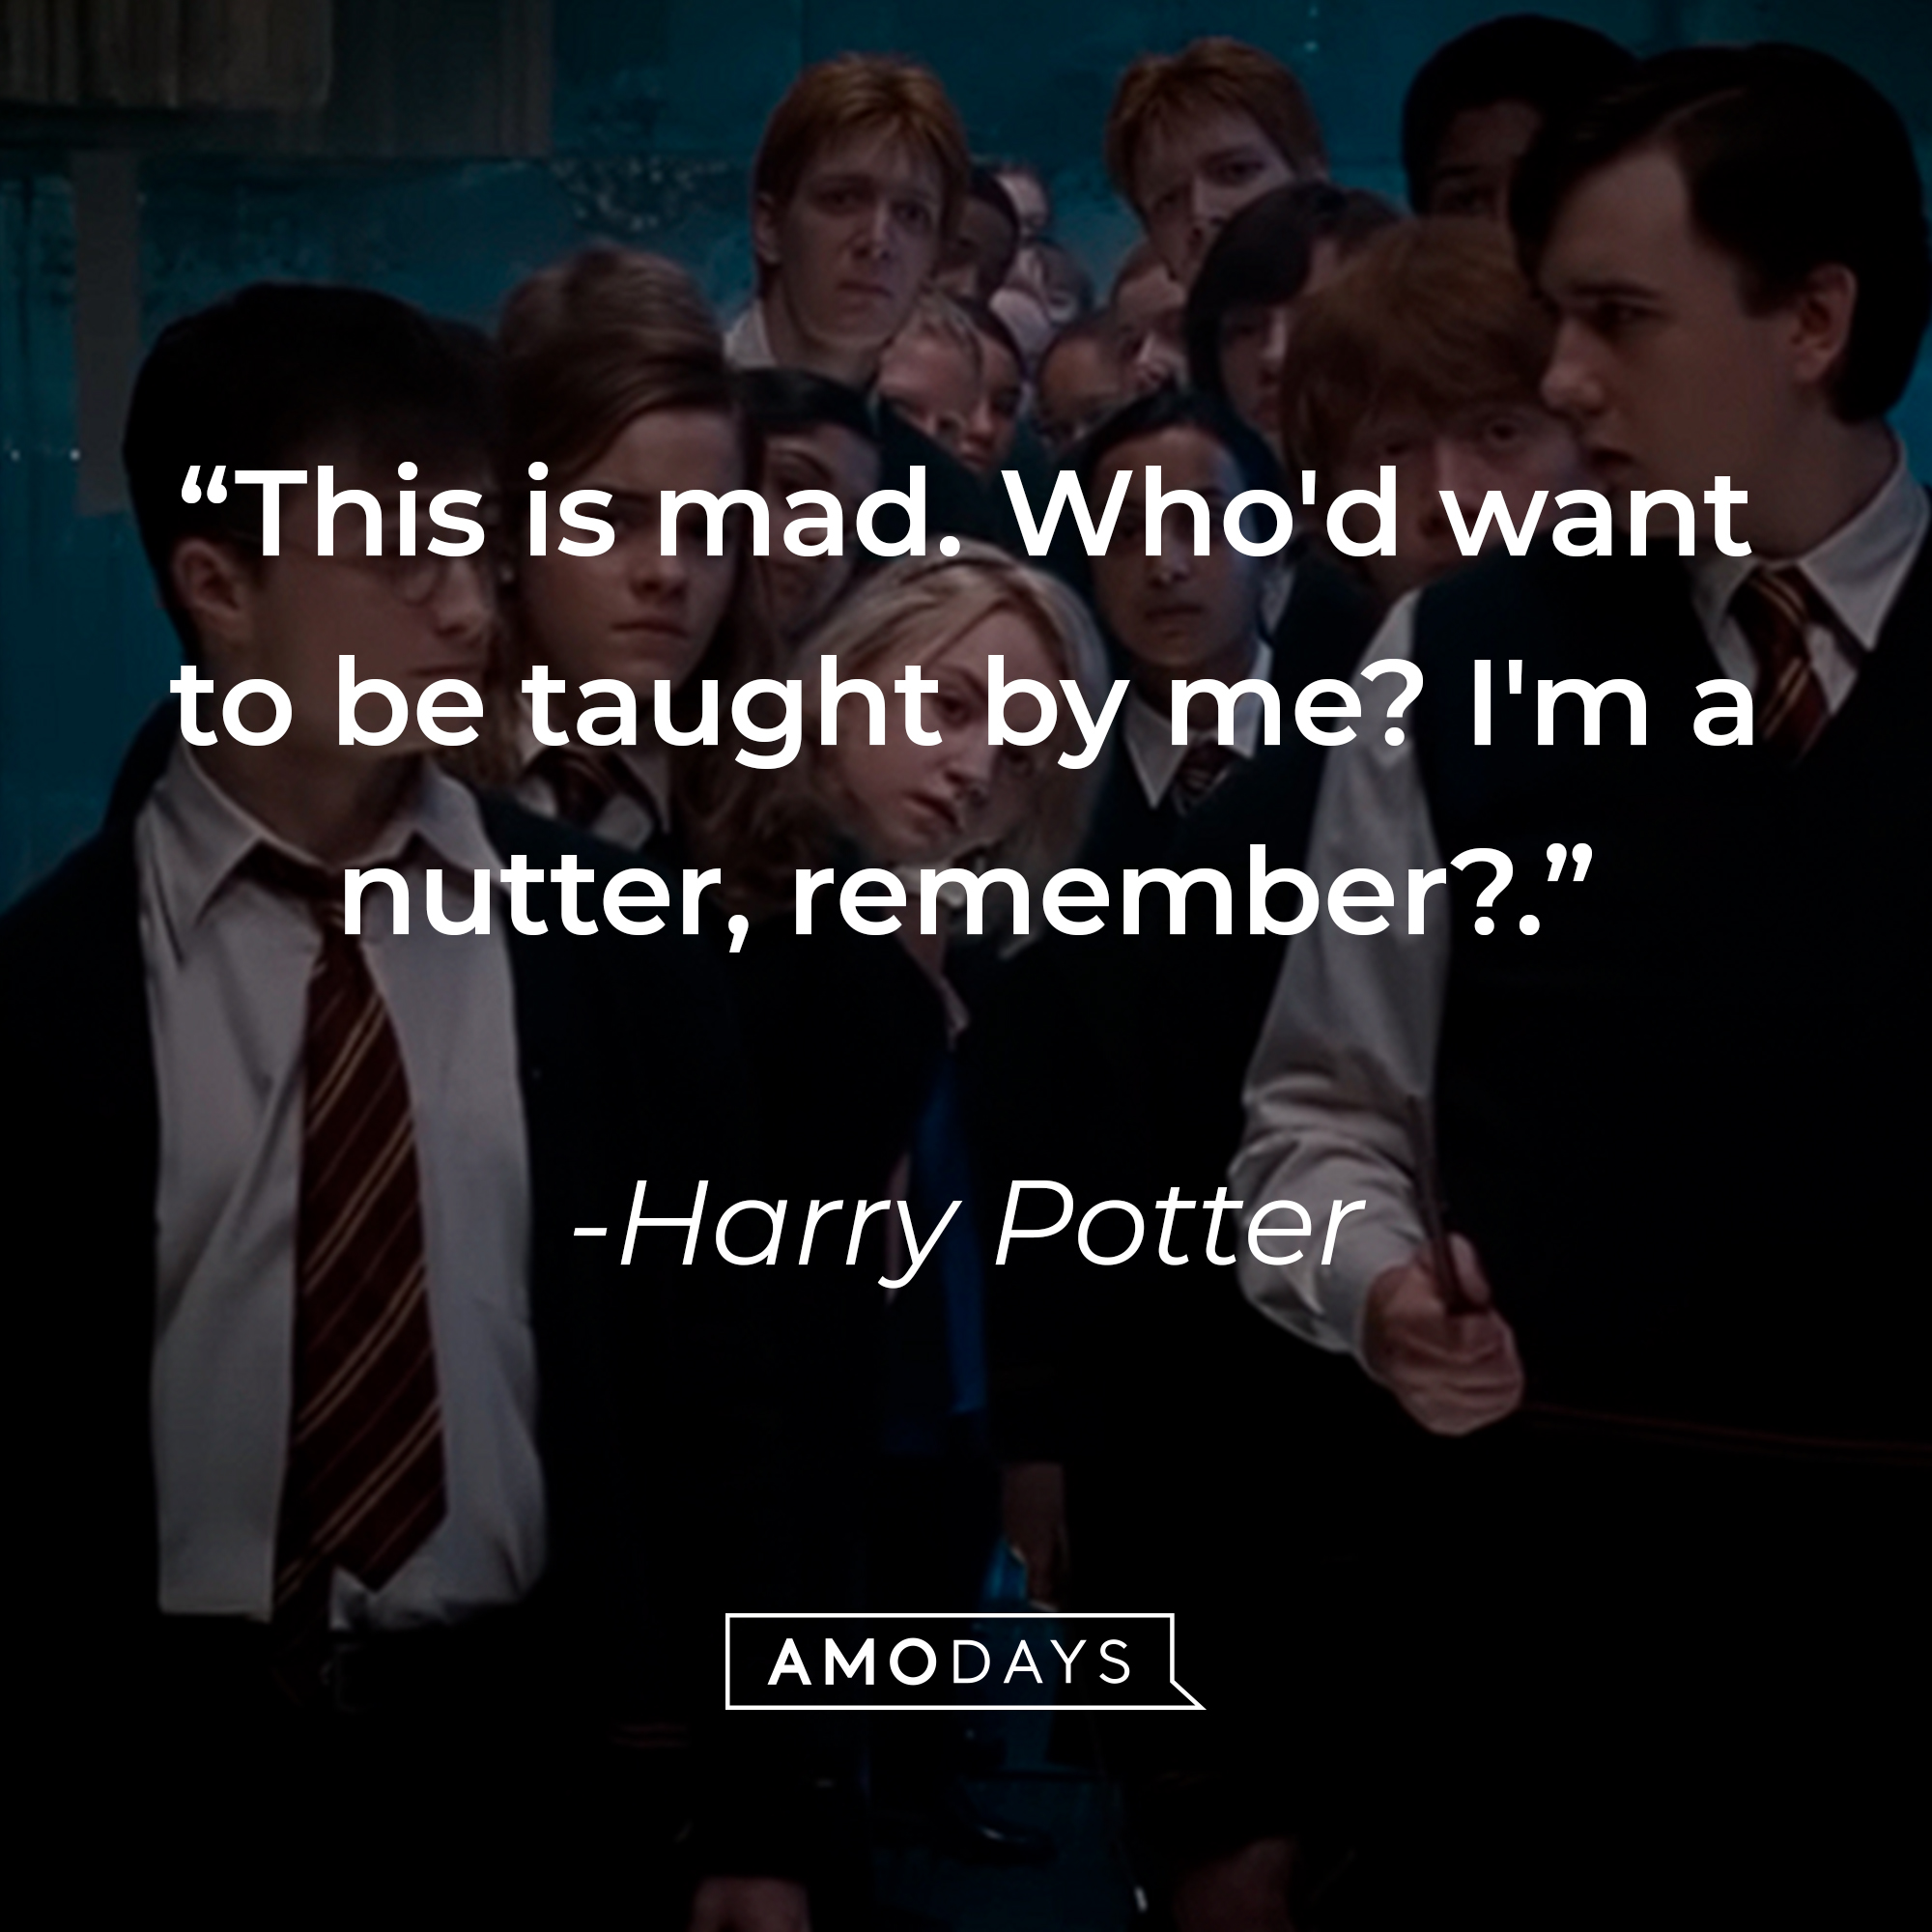 Harry Potter's quote: “This is mad. Who'd want to be taught by me? I'm a nutter, remember?” | Source: youtube.com/harrypotter